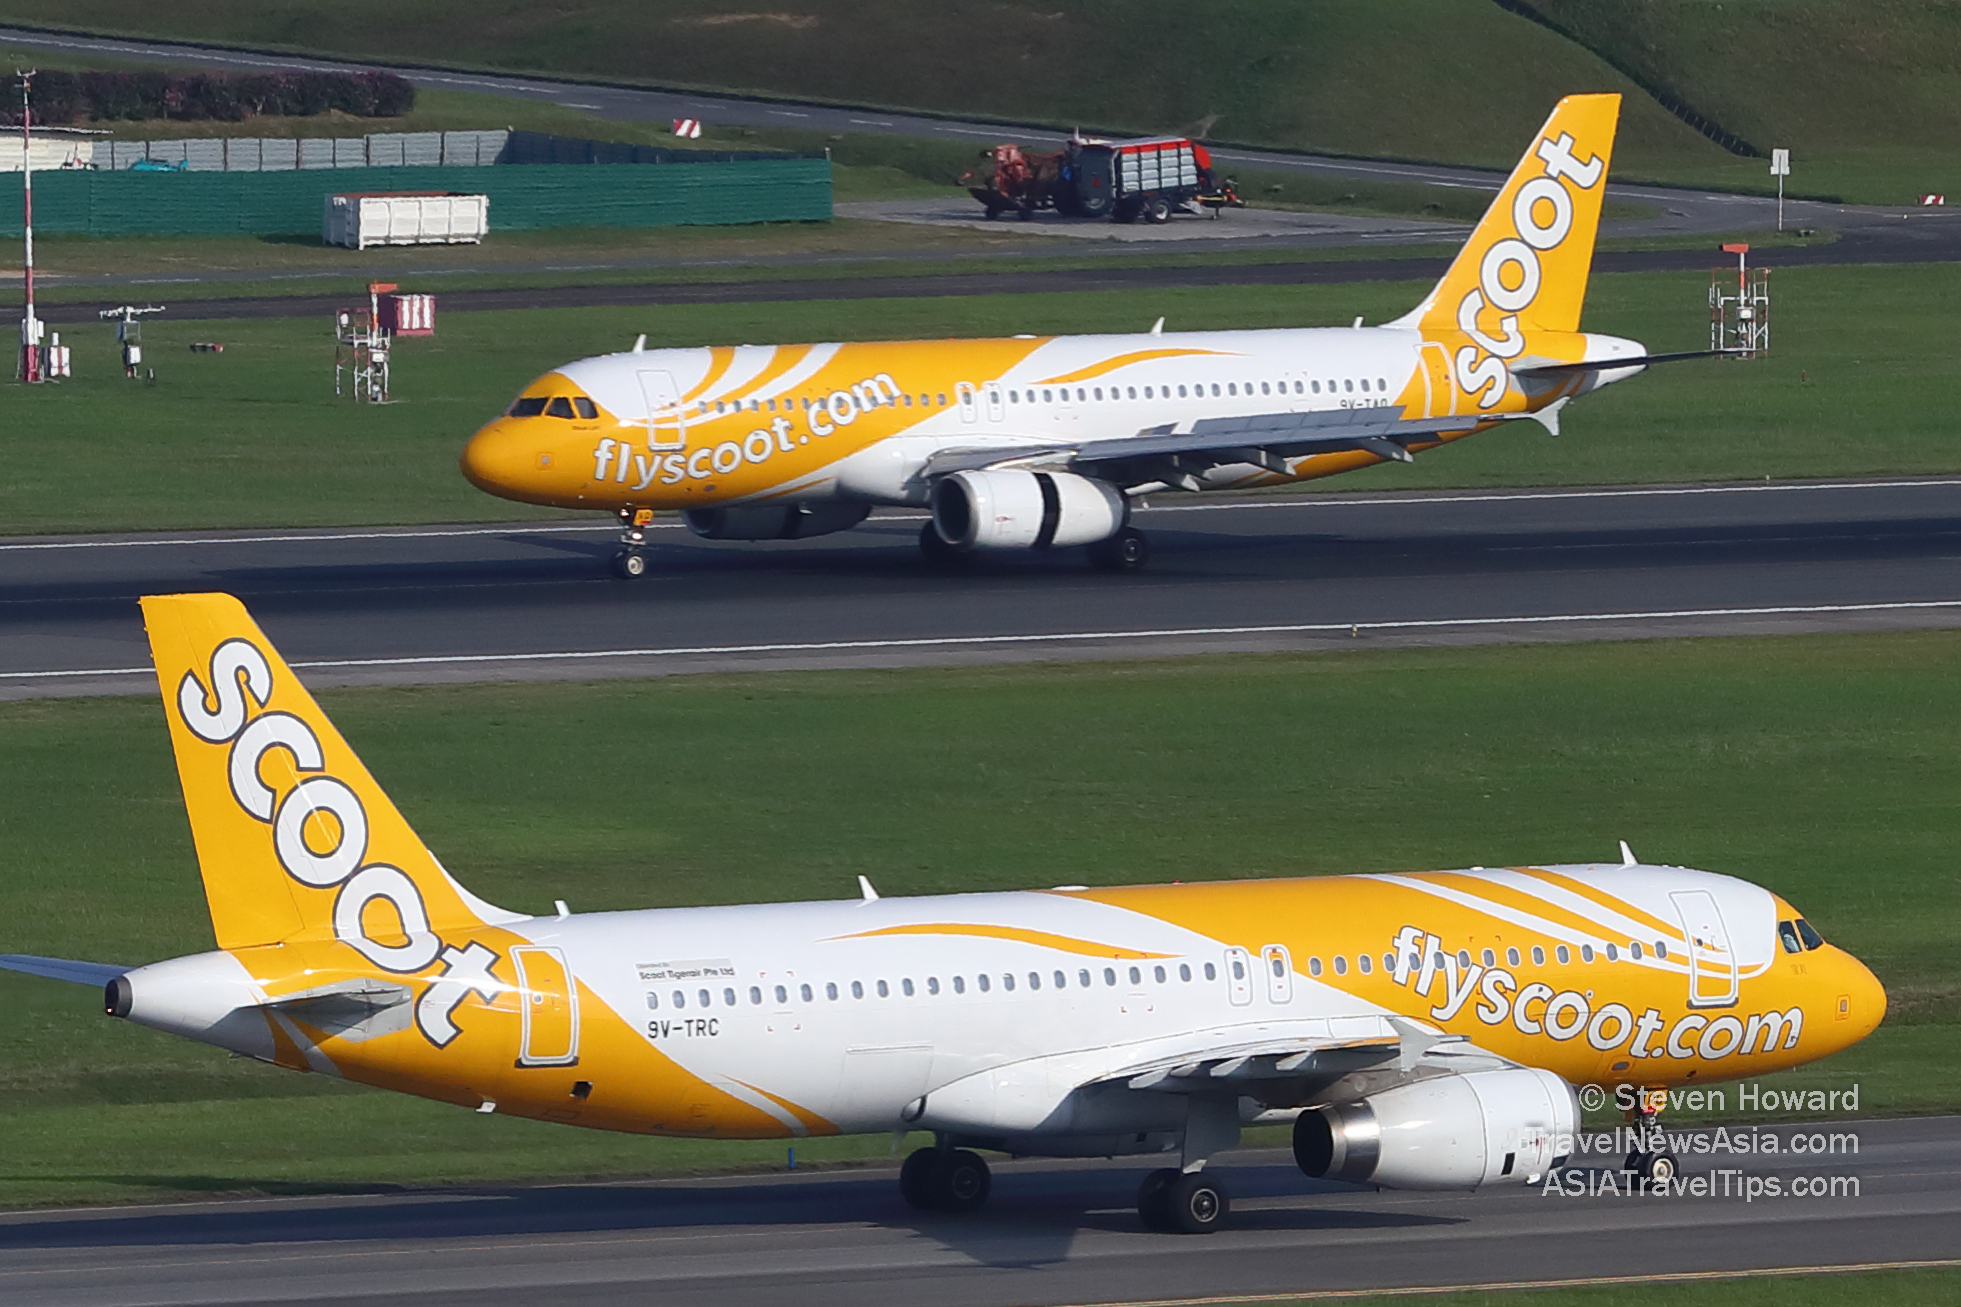 Scoot aircraft at Changi Airport in Singapore. Picture by Steven Howard of TravelNewsAsia.com Click to enlarge.